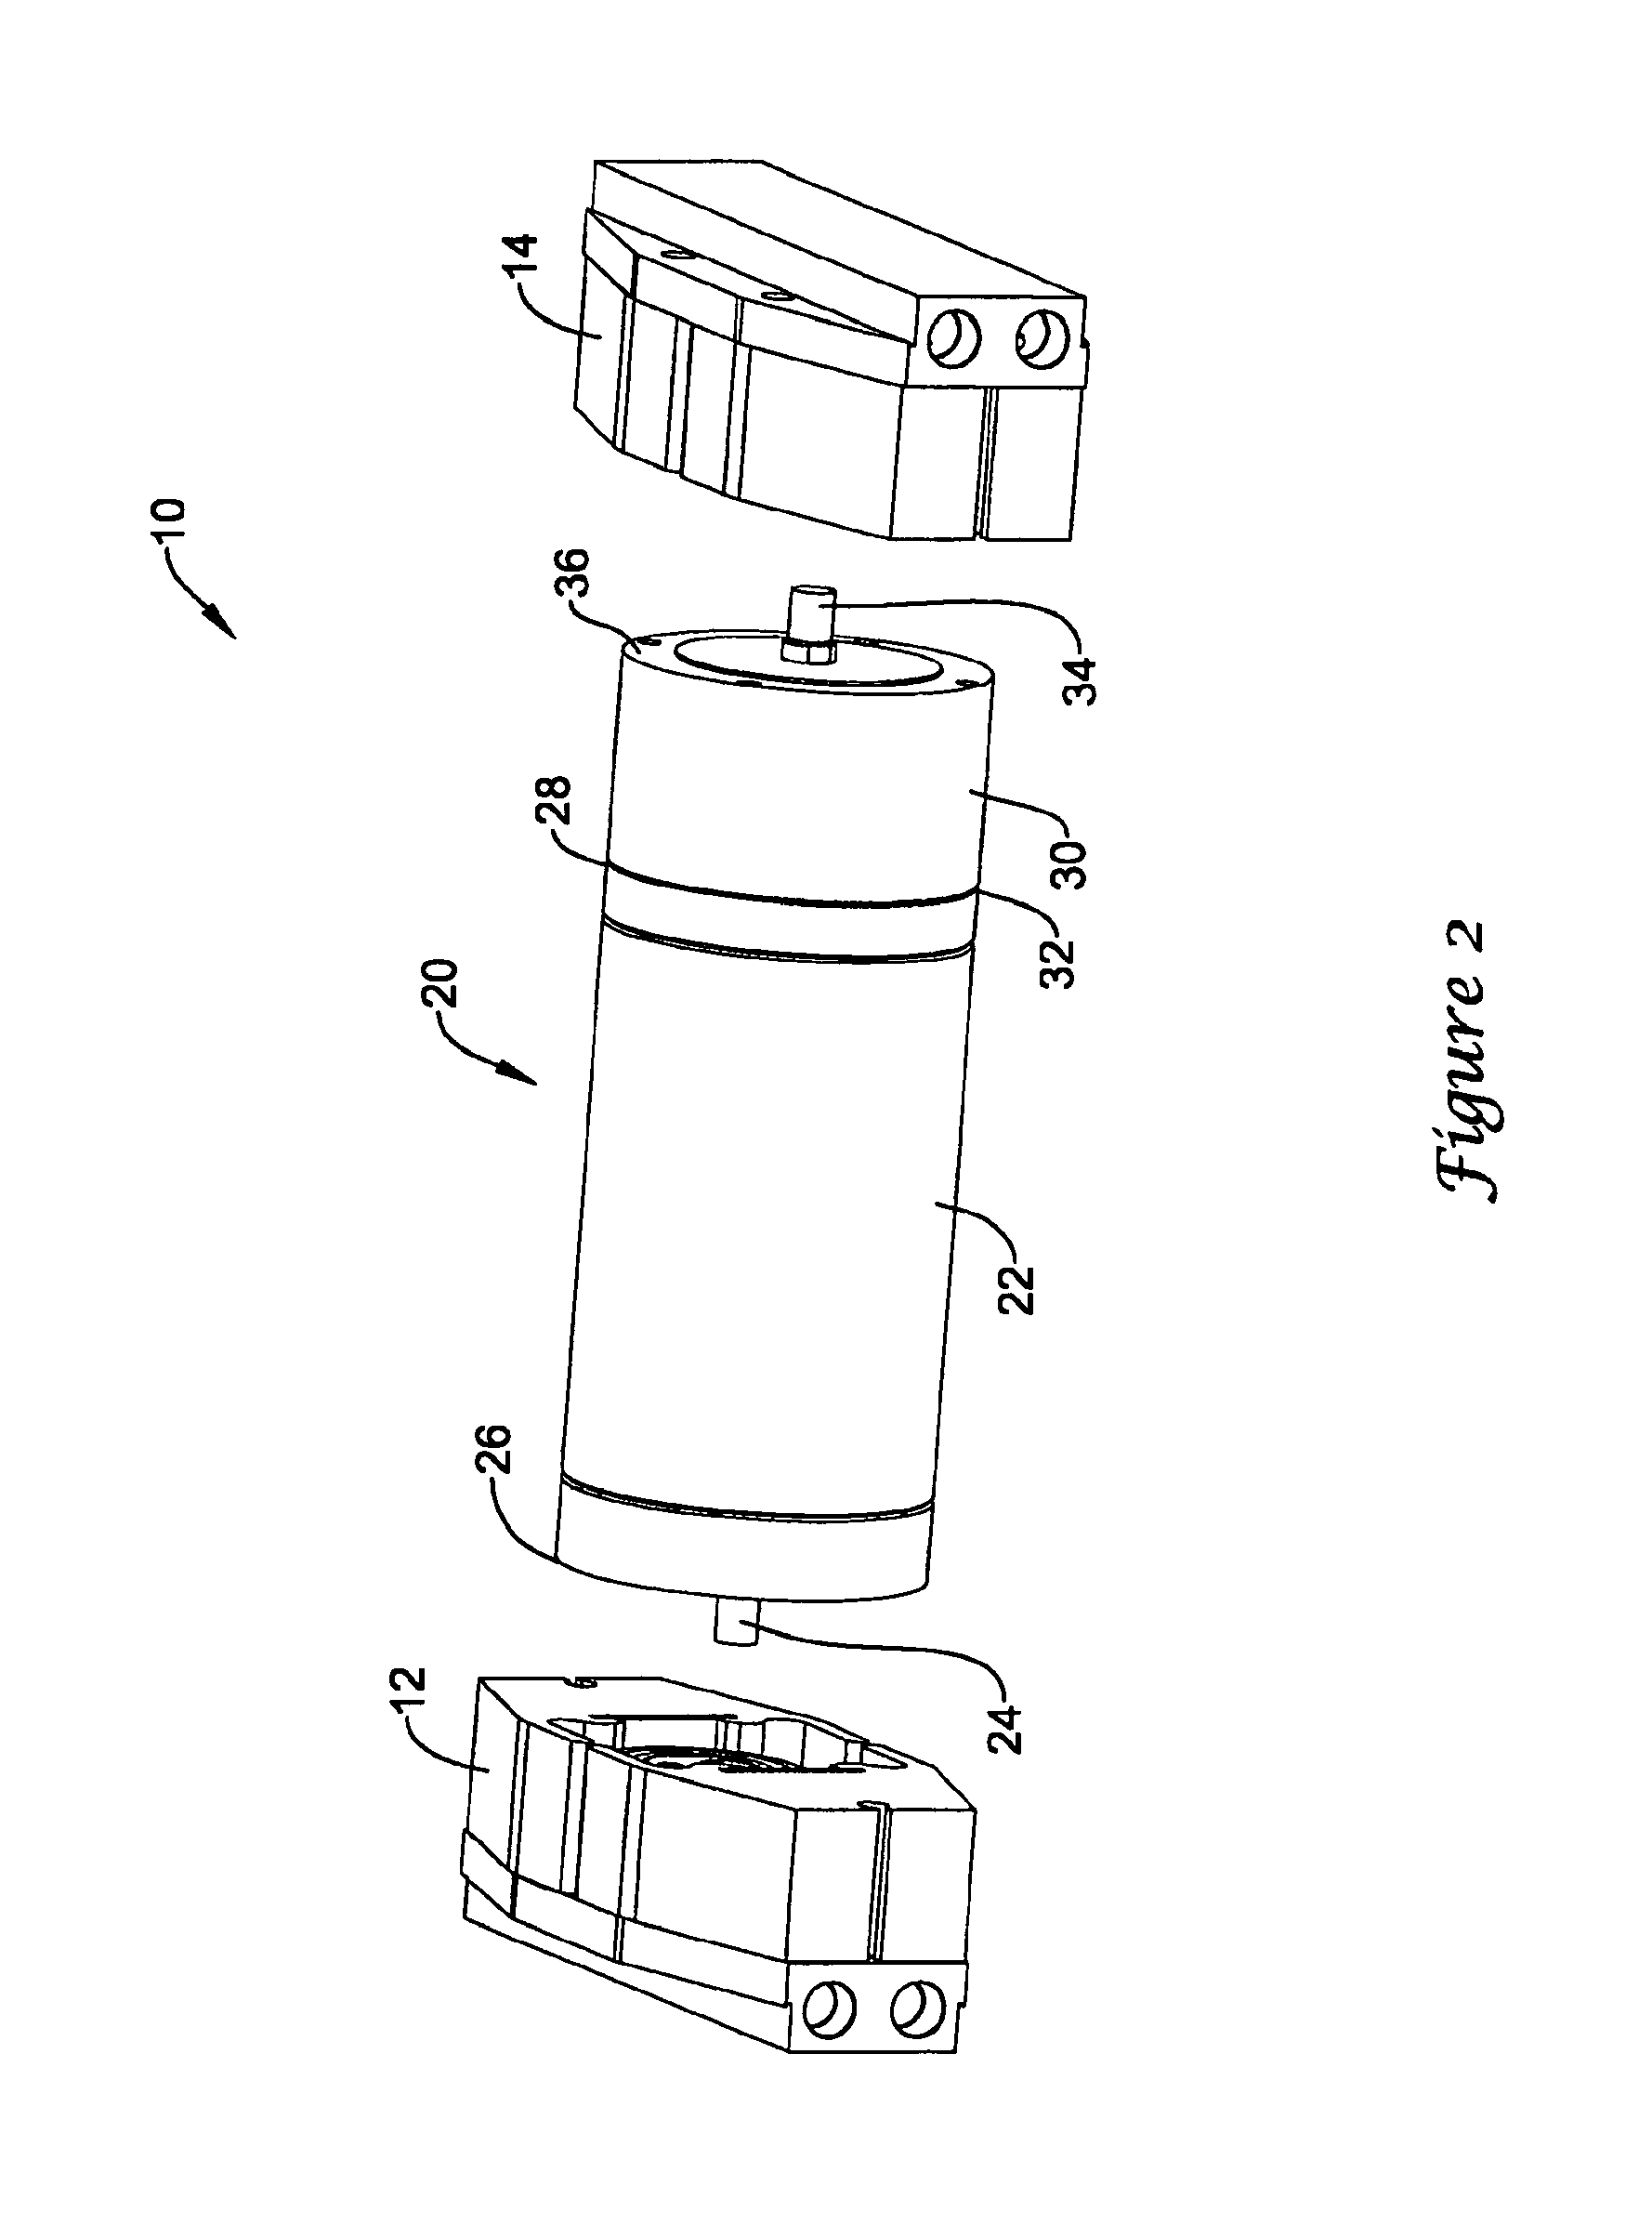 Proportioning pump, control systems and applicator apparatus